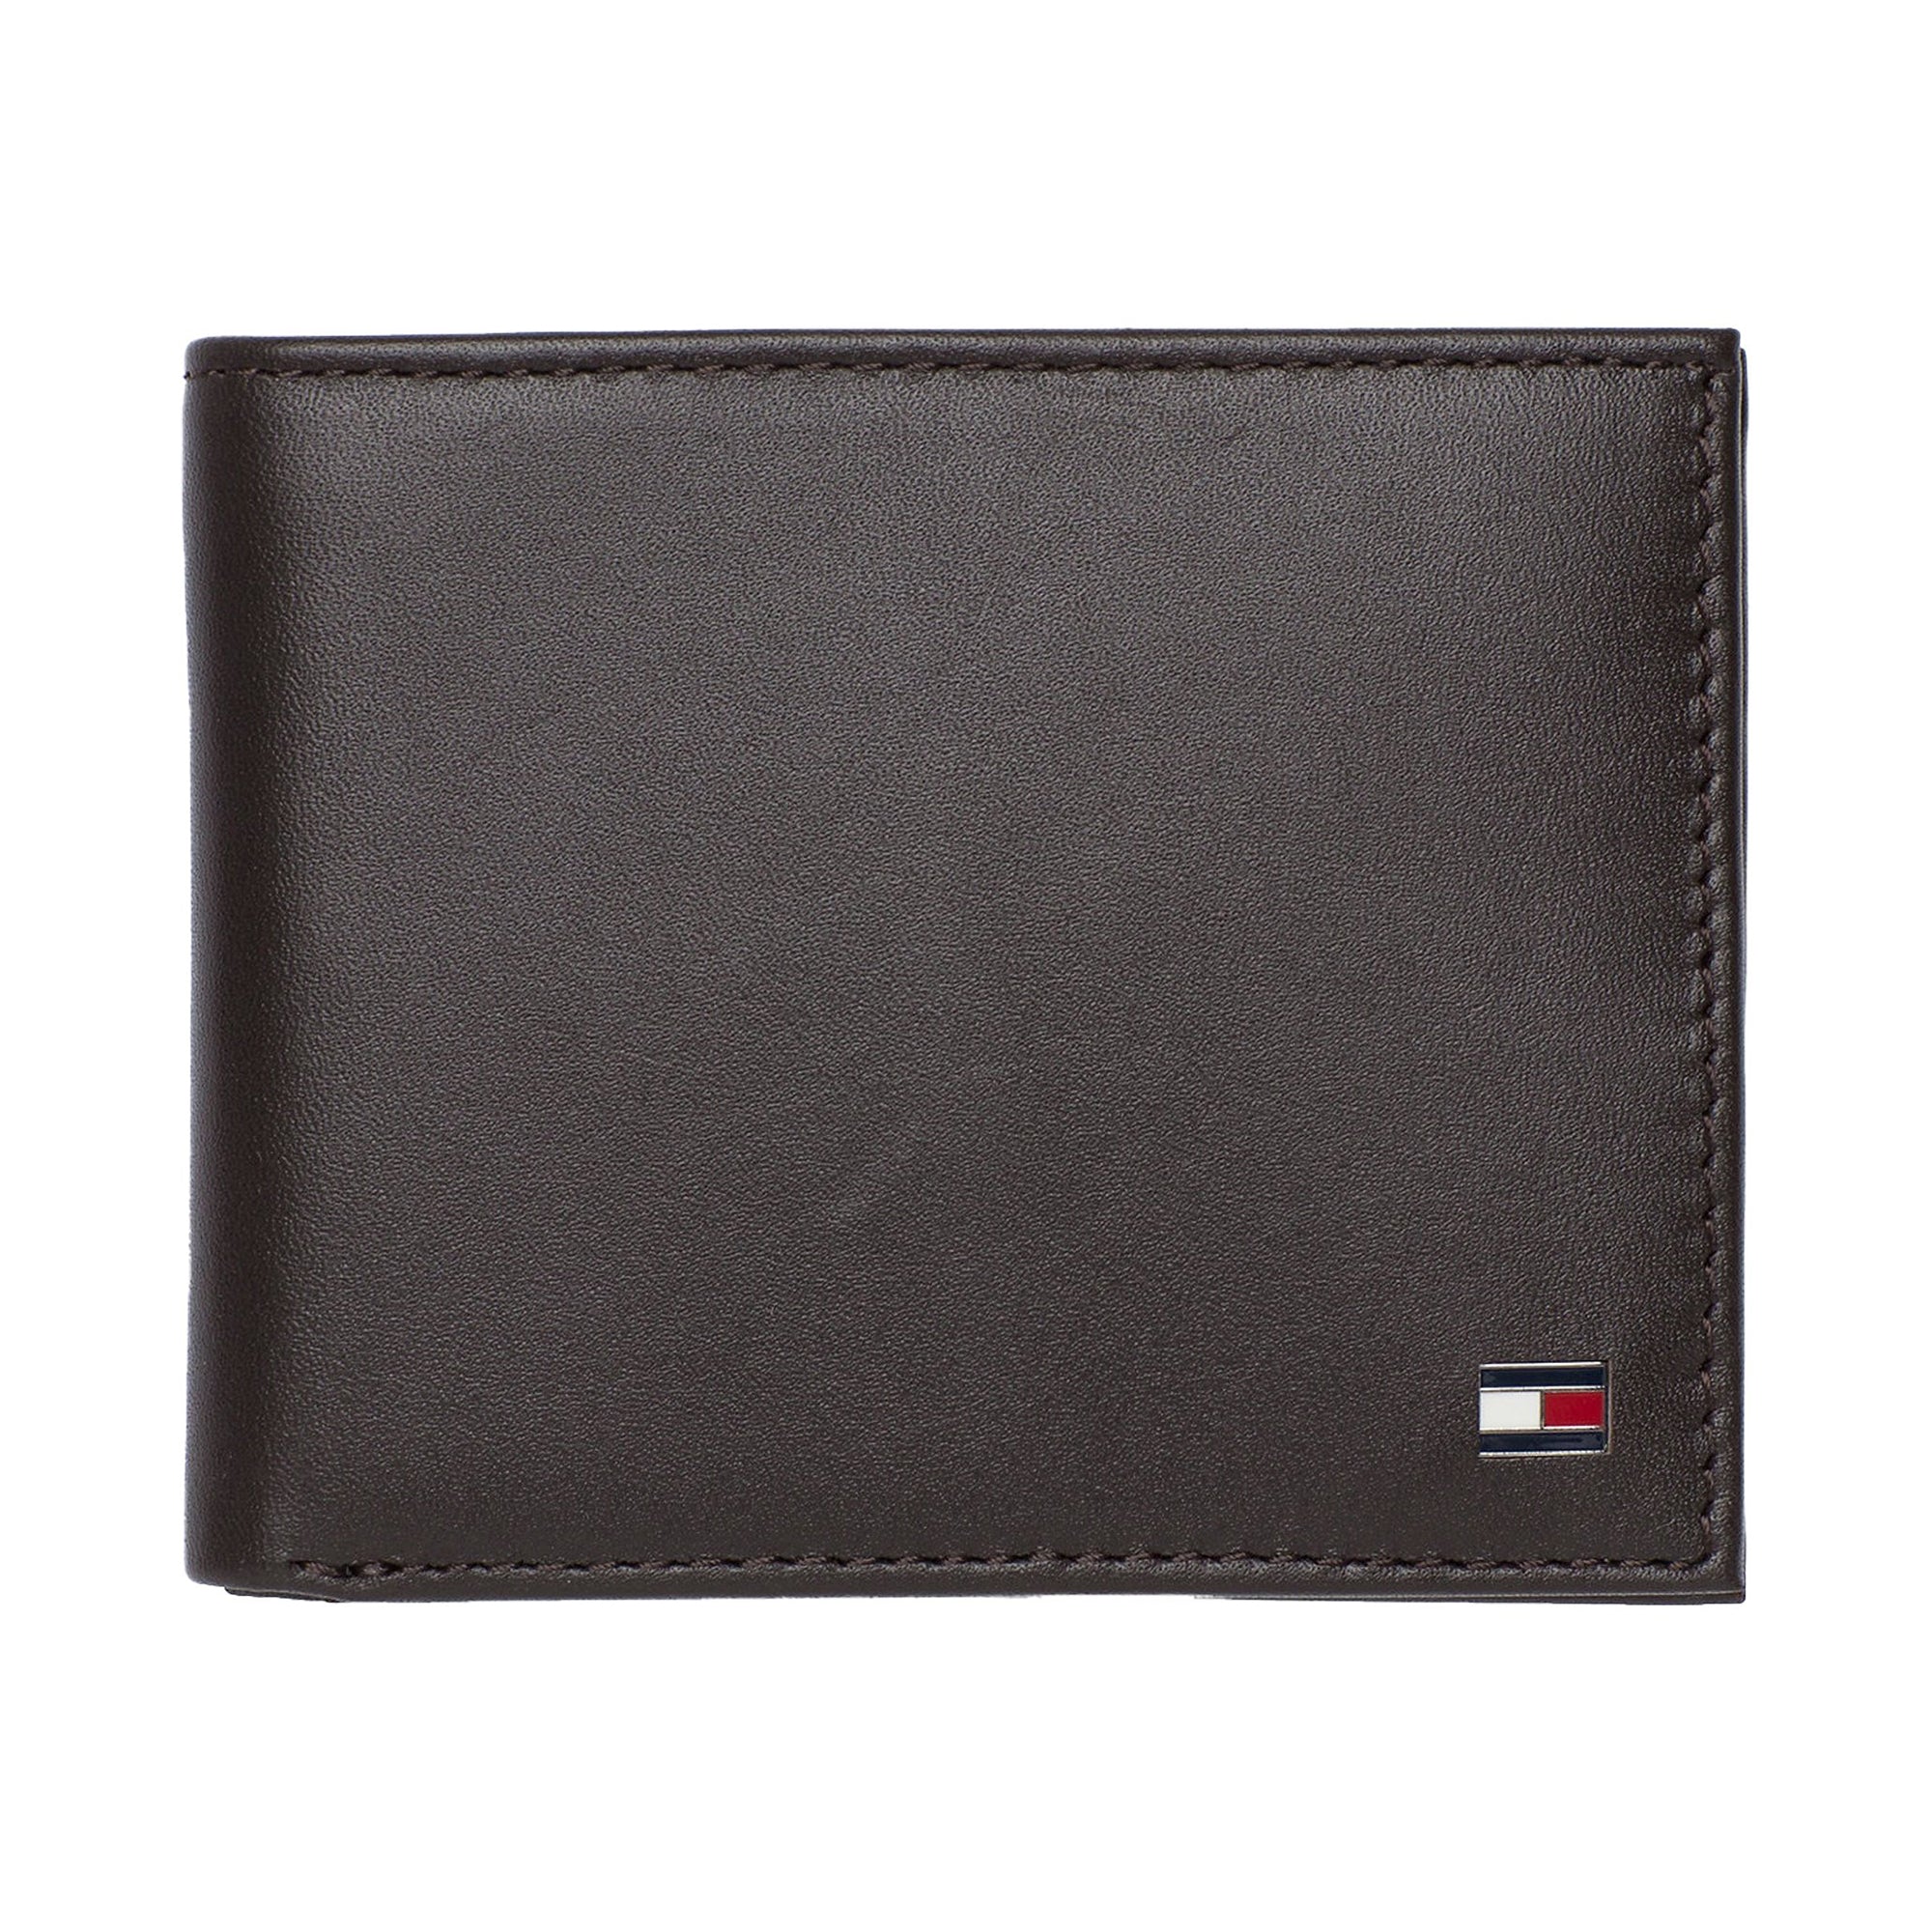 Tommy Hilfiger Eton Small Embossed Bifold Wallet - Brown